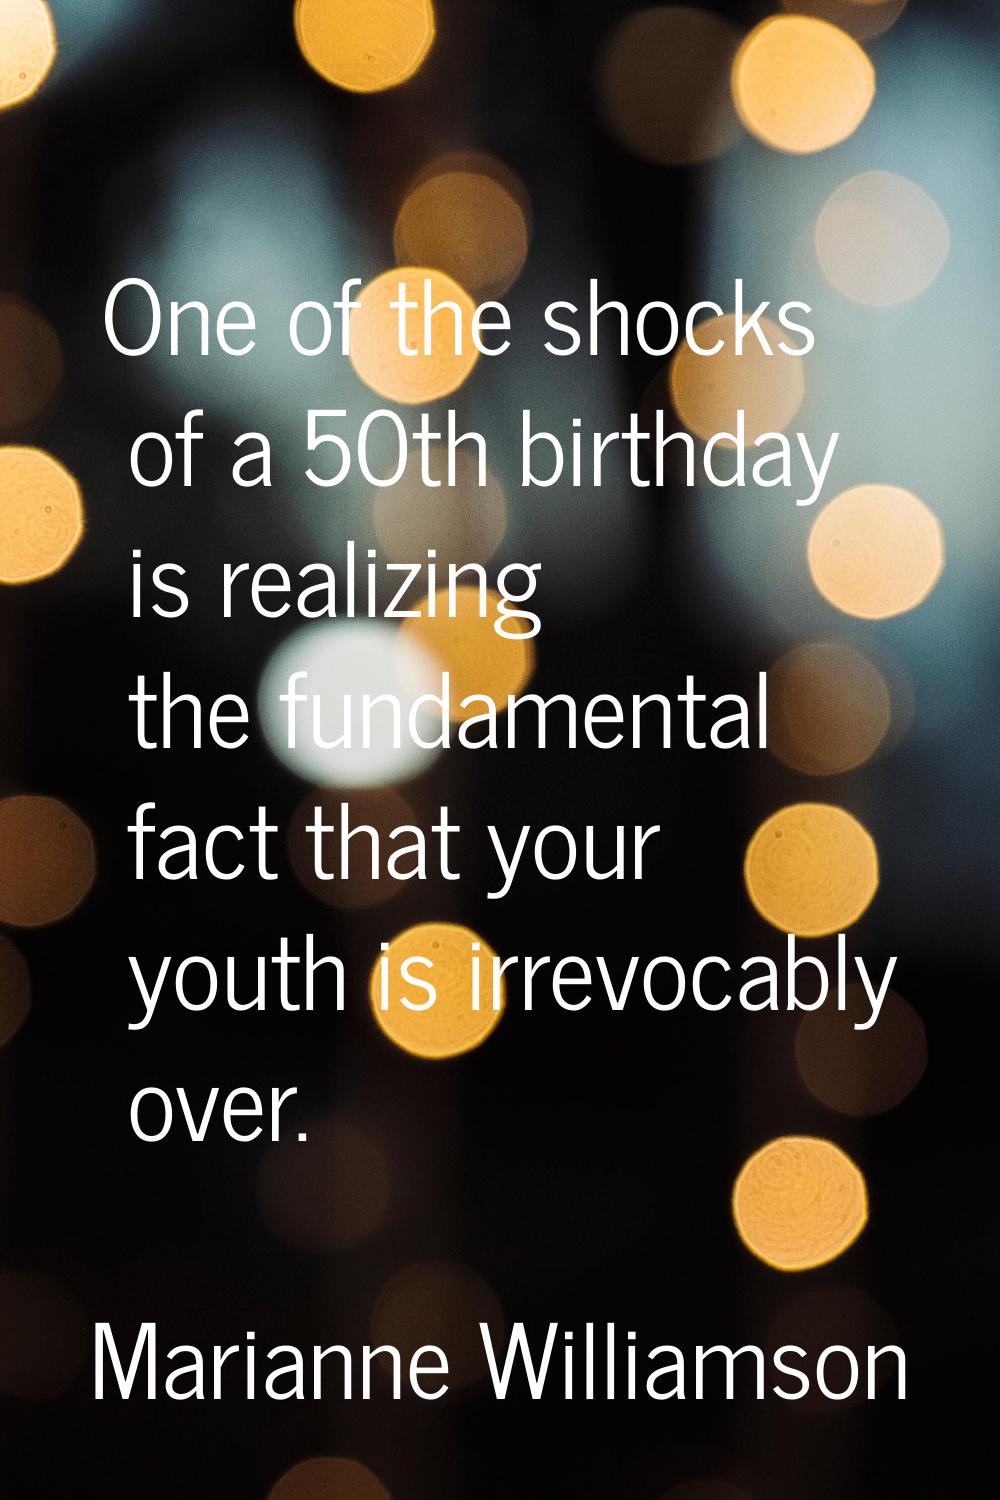 One of the shocks of a 50th birthday is realizing the fundamental fact that your youth is irrevocab